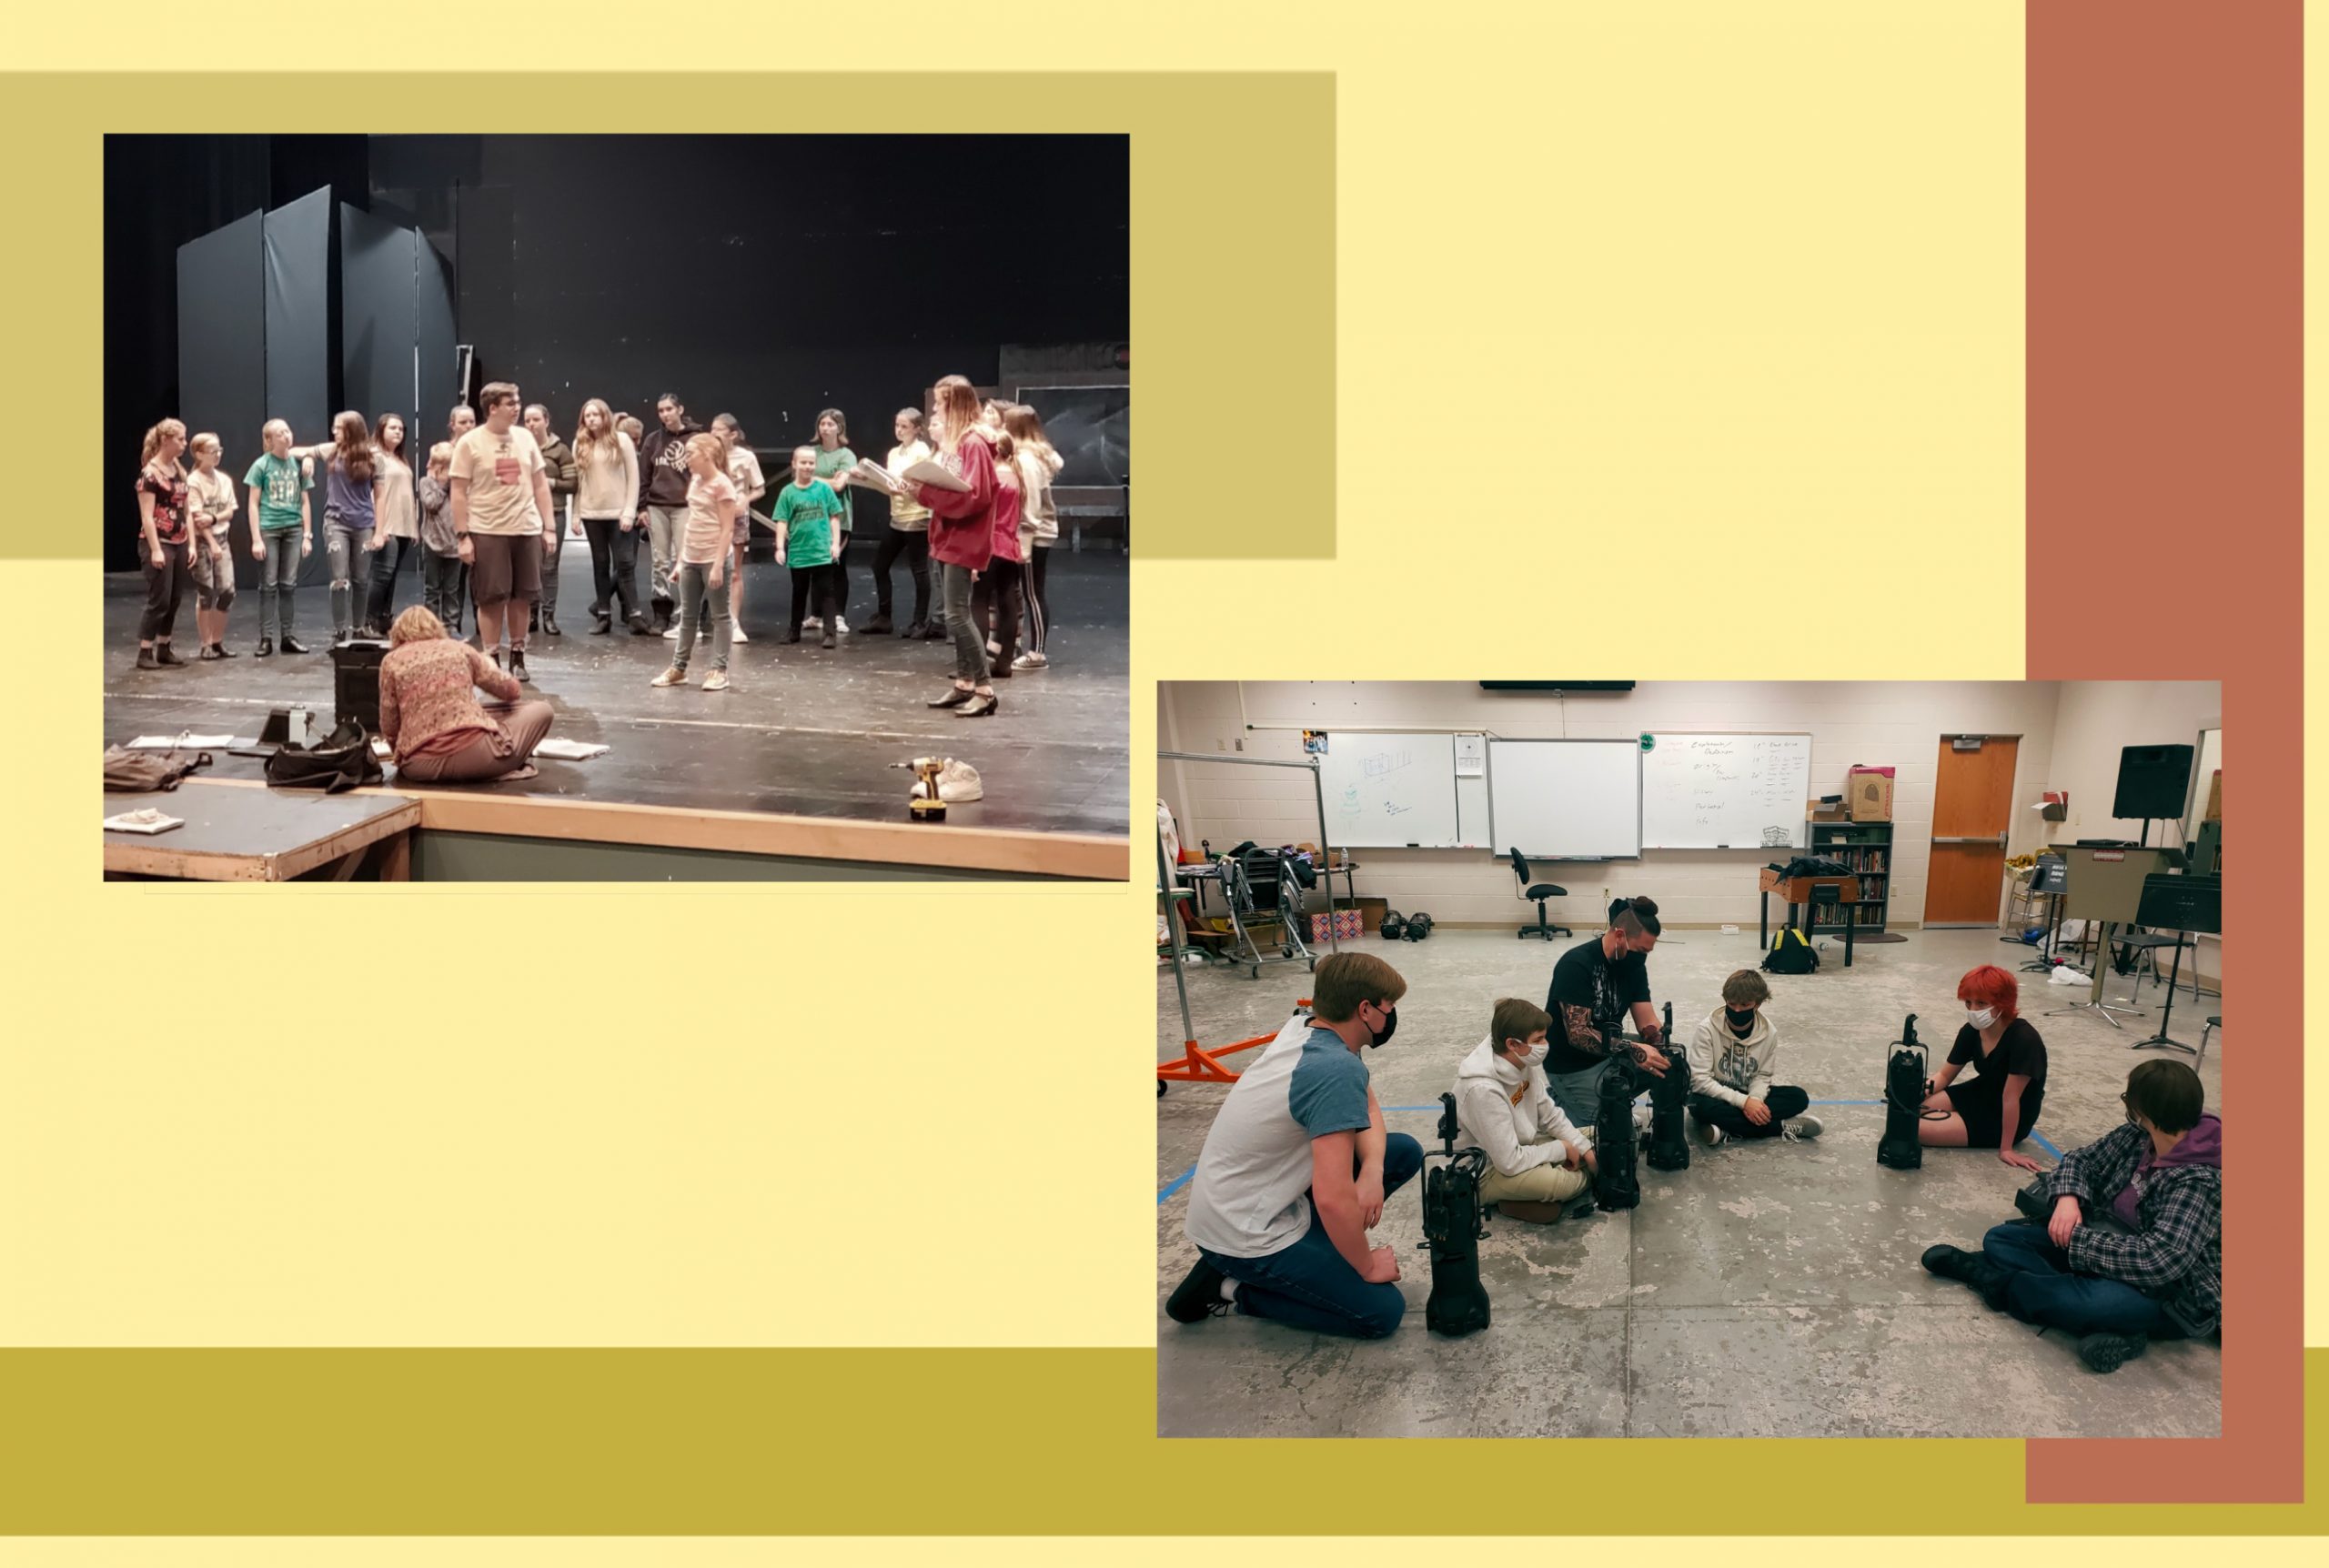 A collage of 2 images - 1 has many students huddled together practicing on stage, The second image has fewer students wearing masks rehearsing in a room.